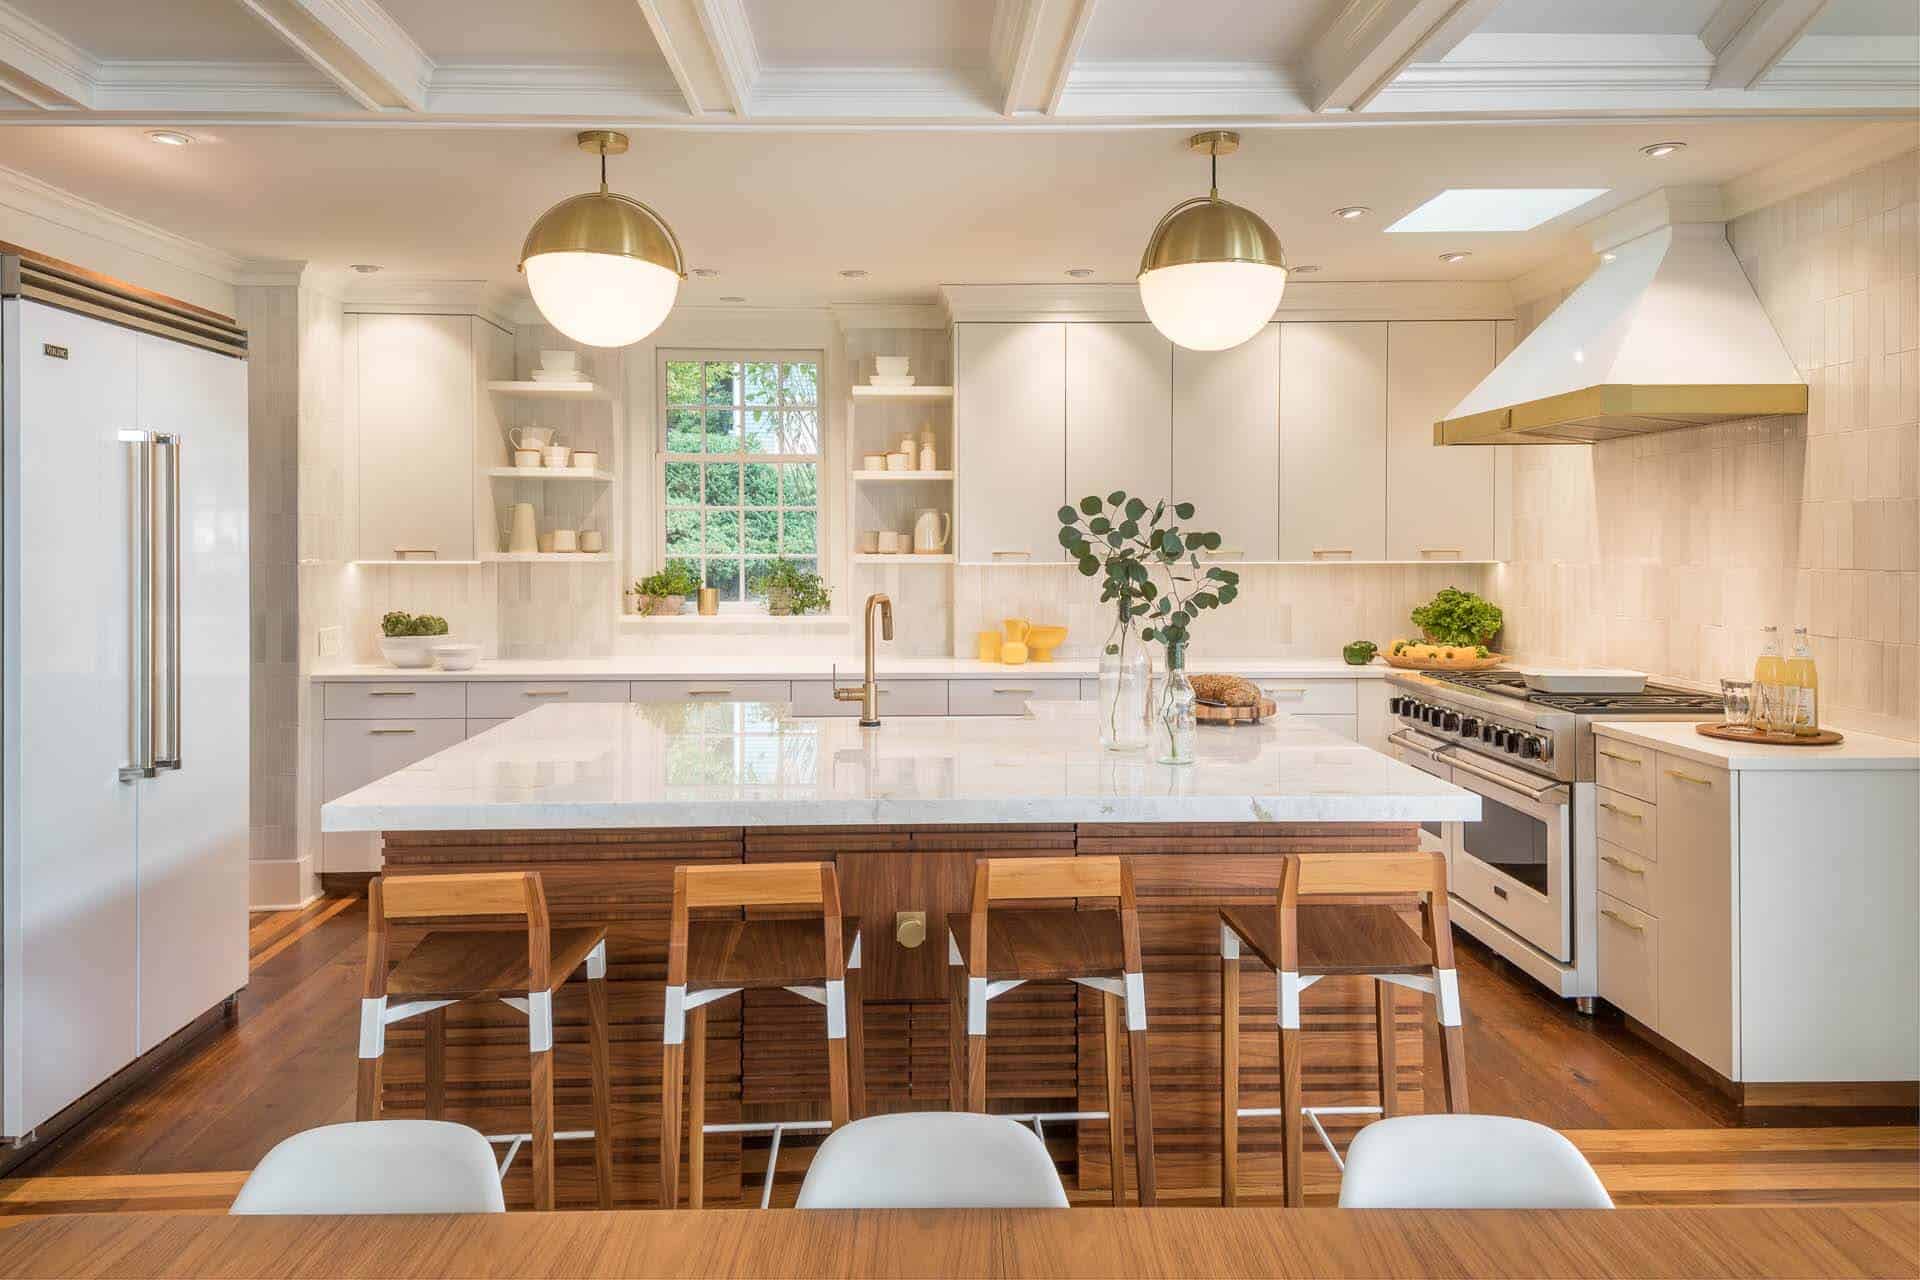 Contemporary kitchen features white Rutt Regency cabinetry, with brass hardware and white marble topped walnut island.